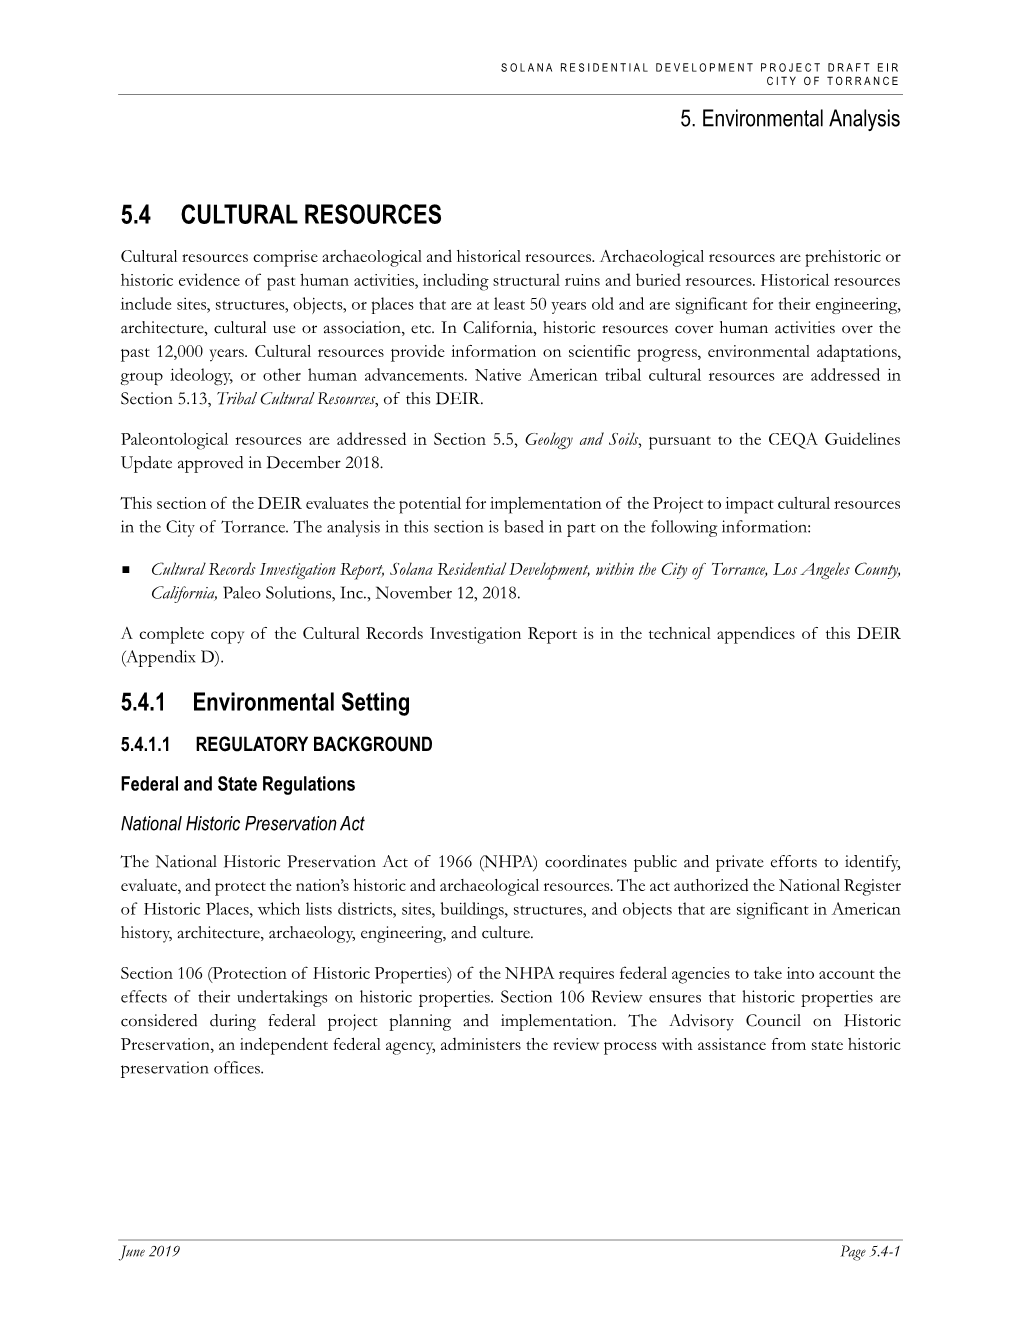 5.4 CULTURAL RESOURCES Cultural Resources Comprise Archaeological and Historical Resources